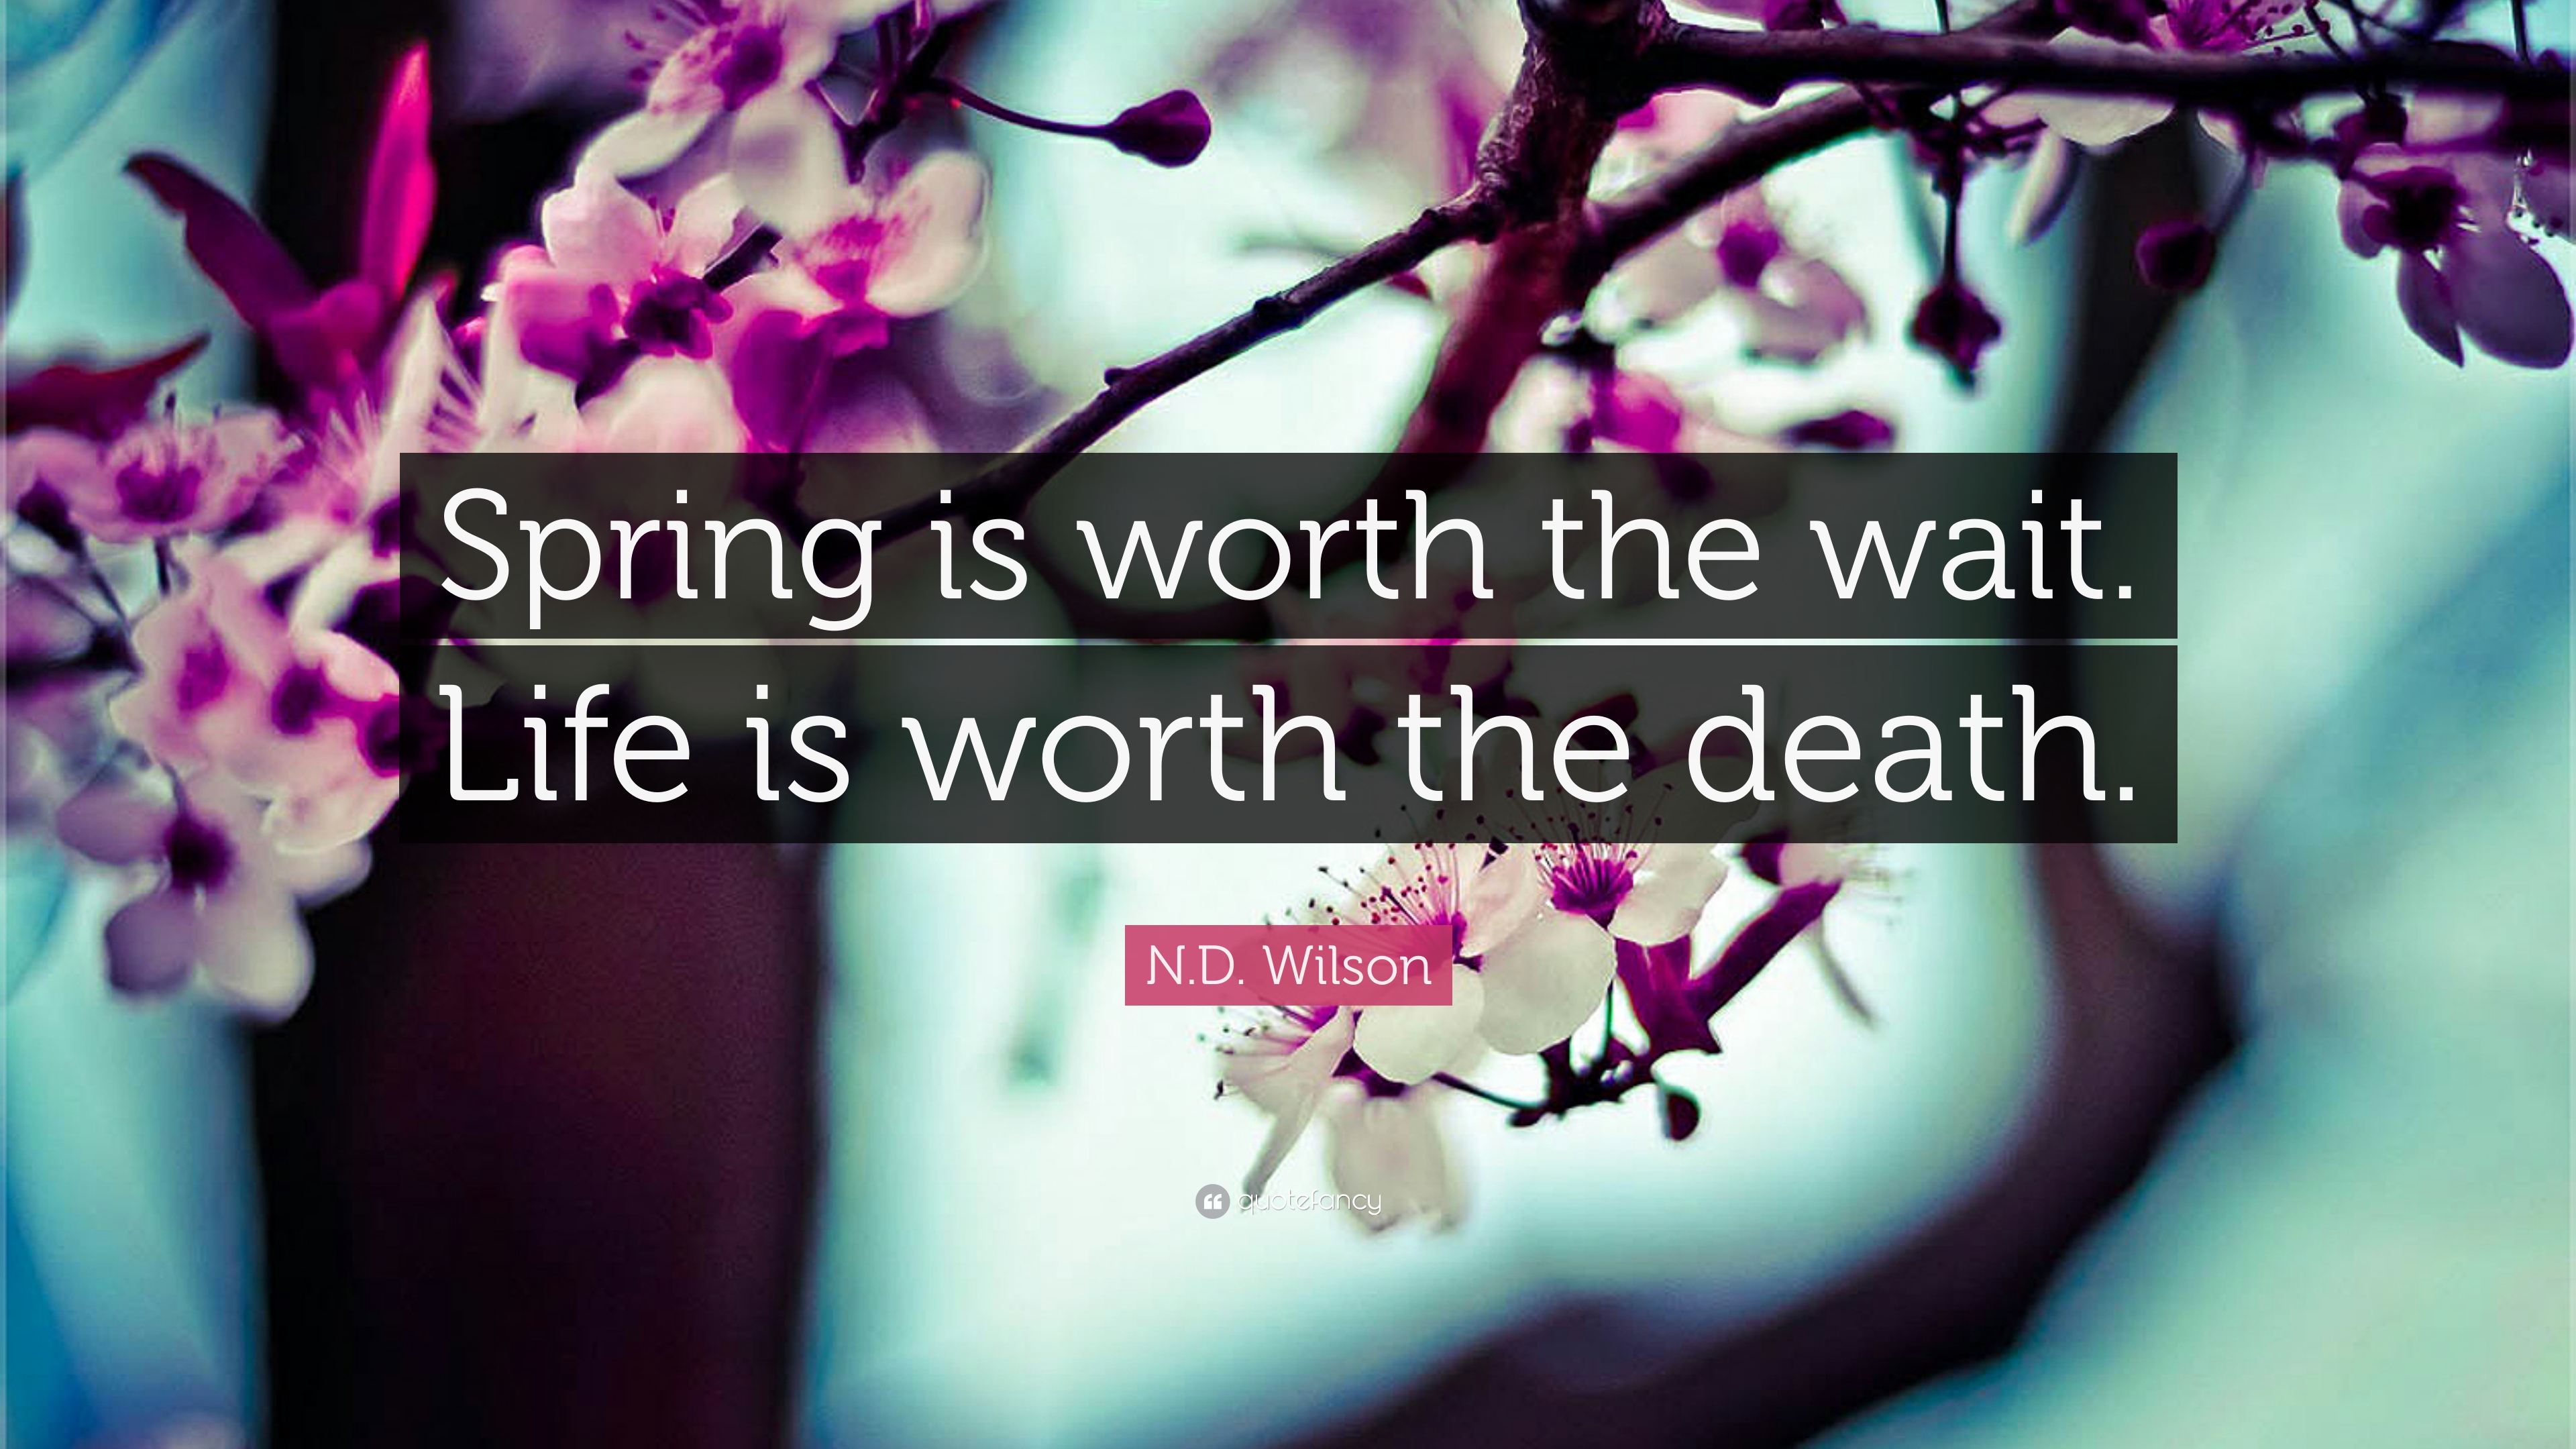 N.D. Wilson Quote: “Spring is worth the wait. Life is worth